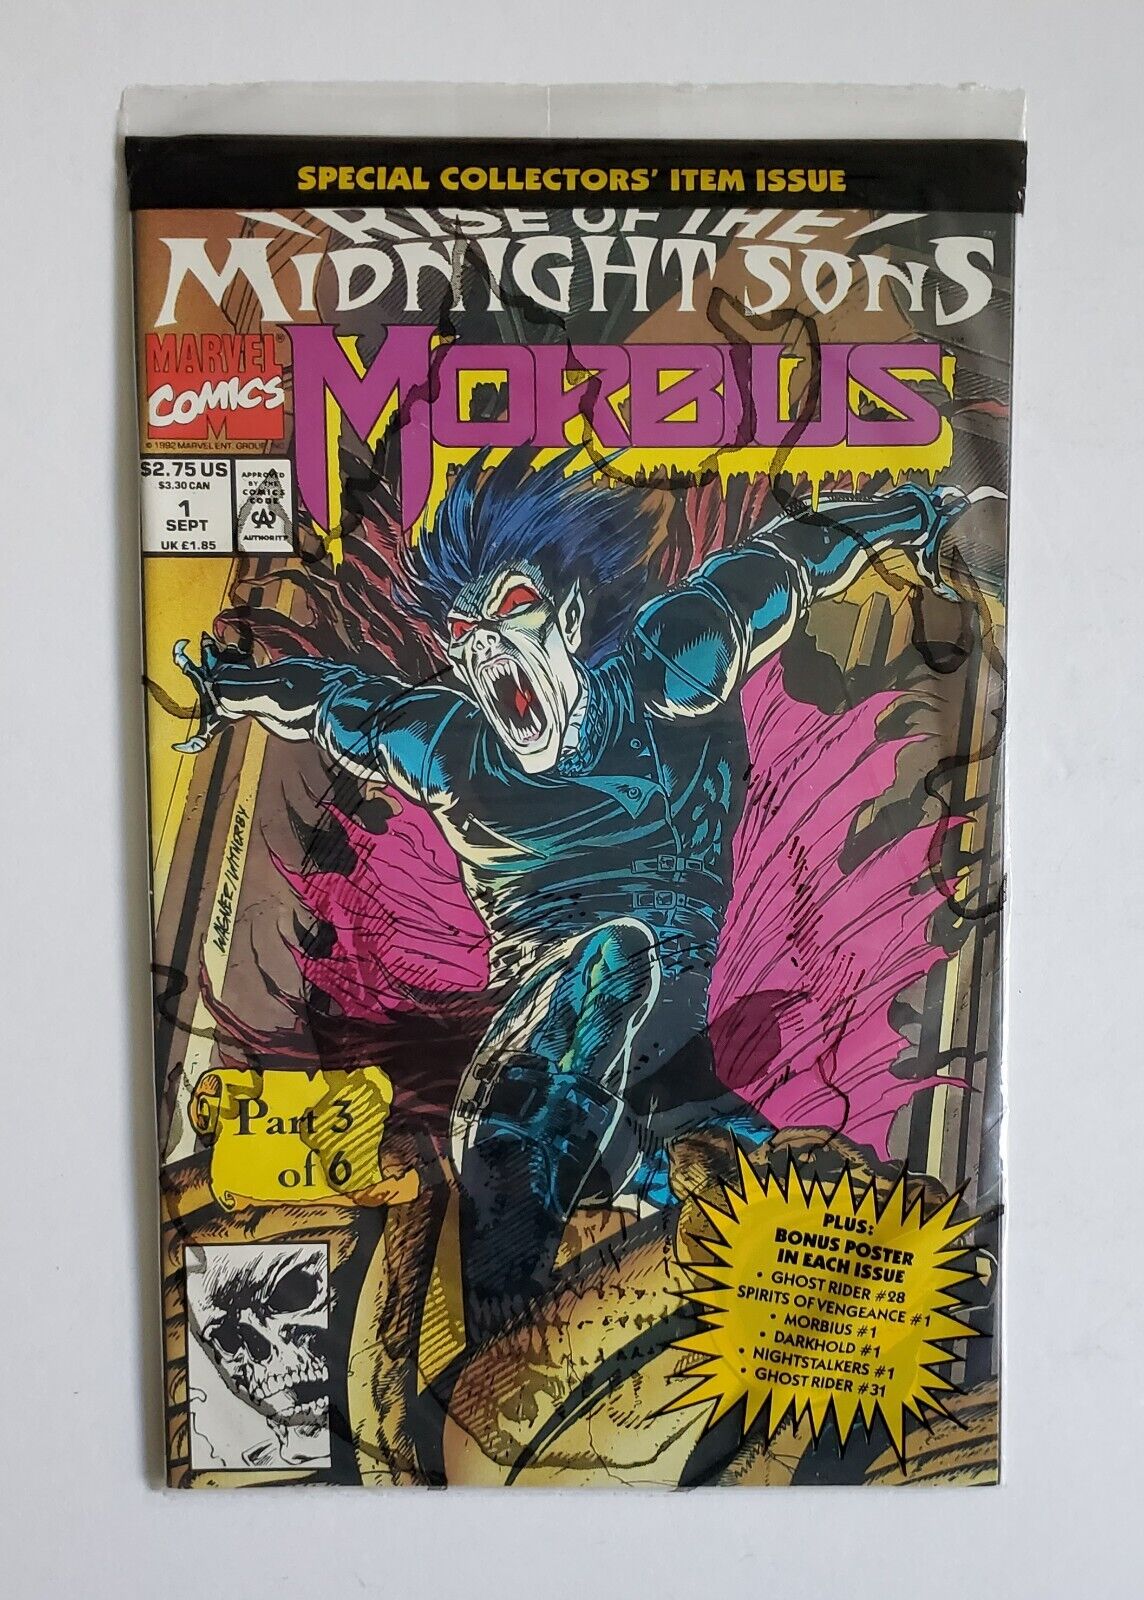 Morbius: The Living Vampire #1-Polybagged- Rise of Midnight Sons 3 NEVER OPENED